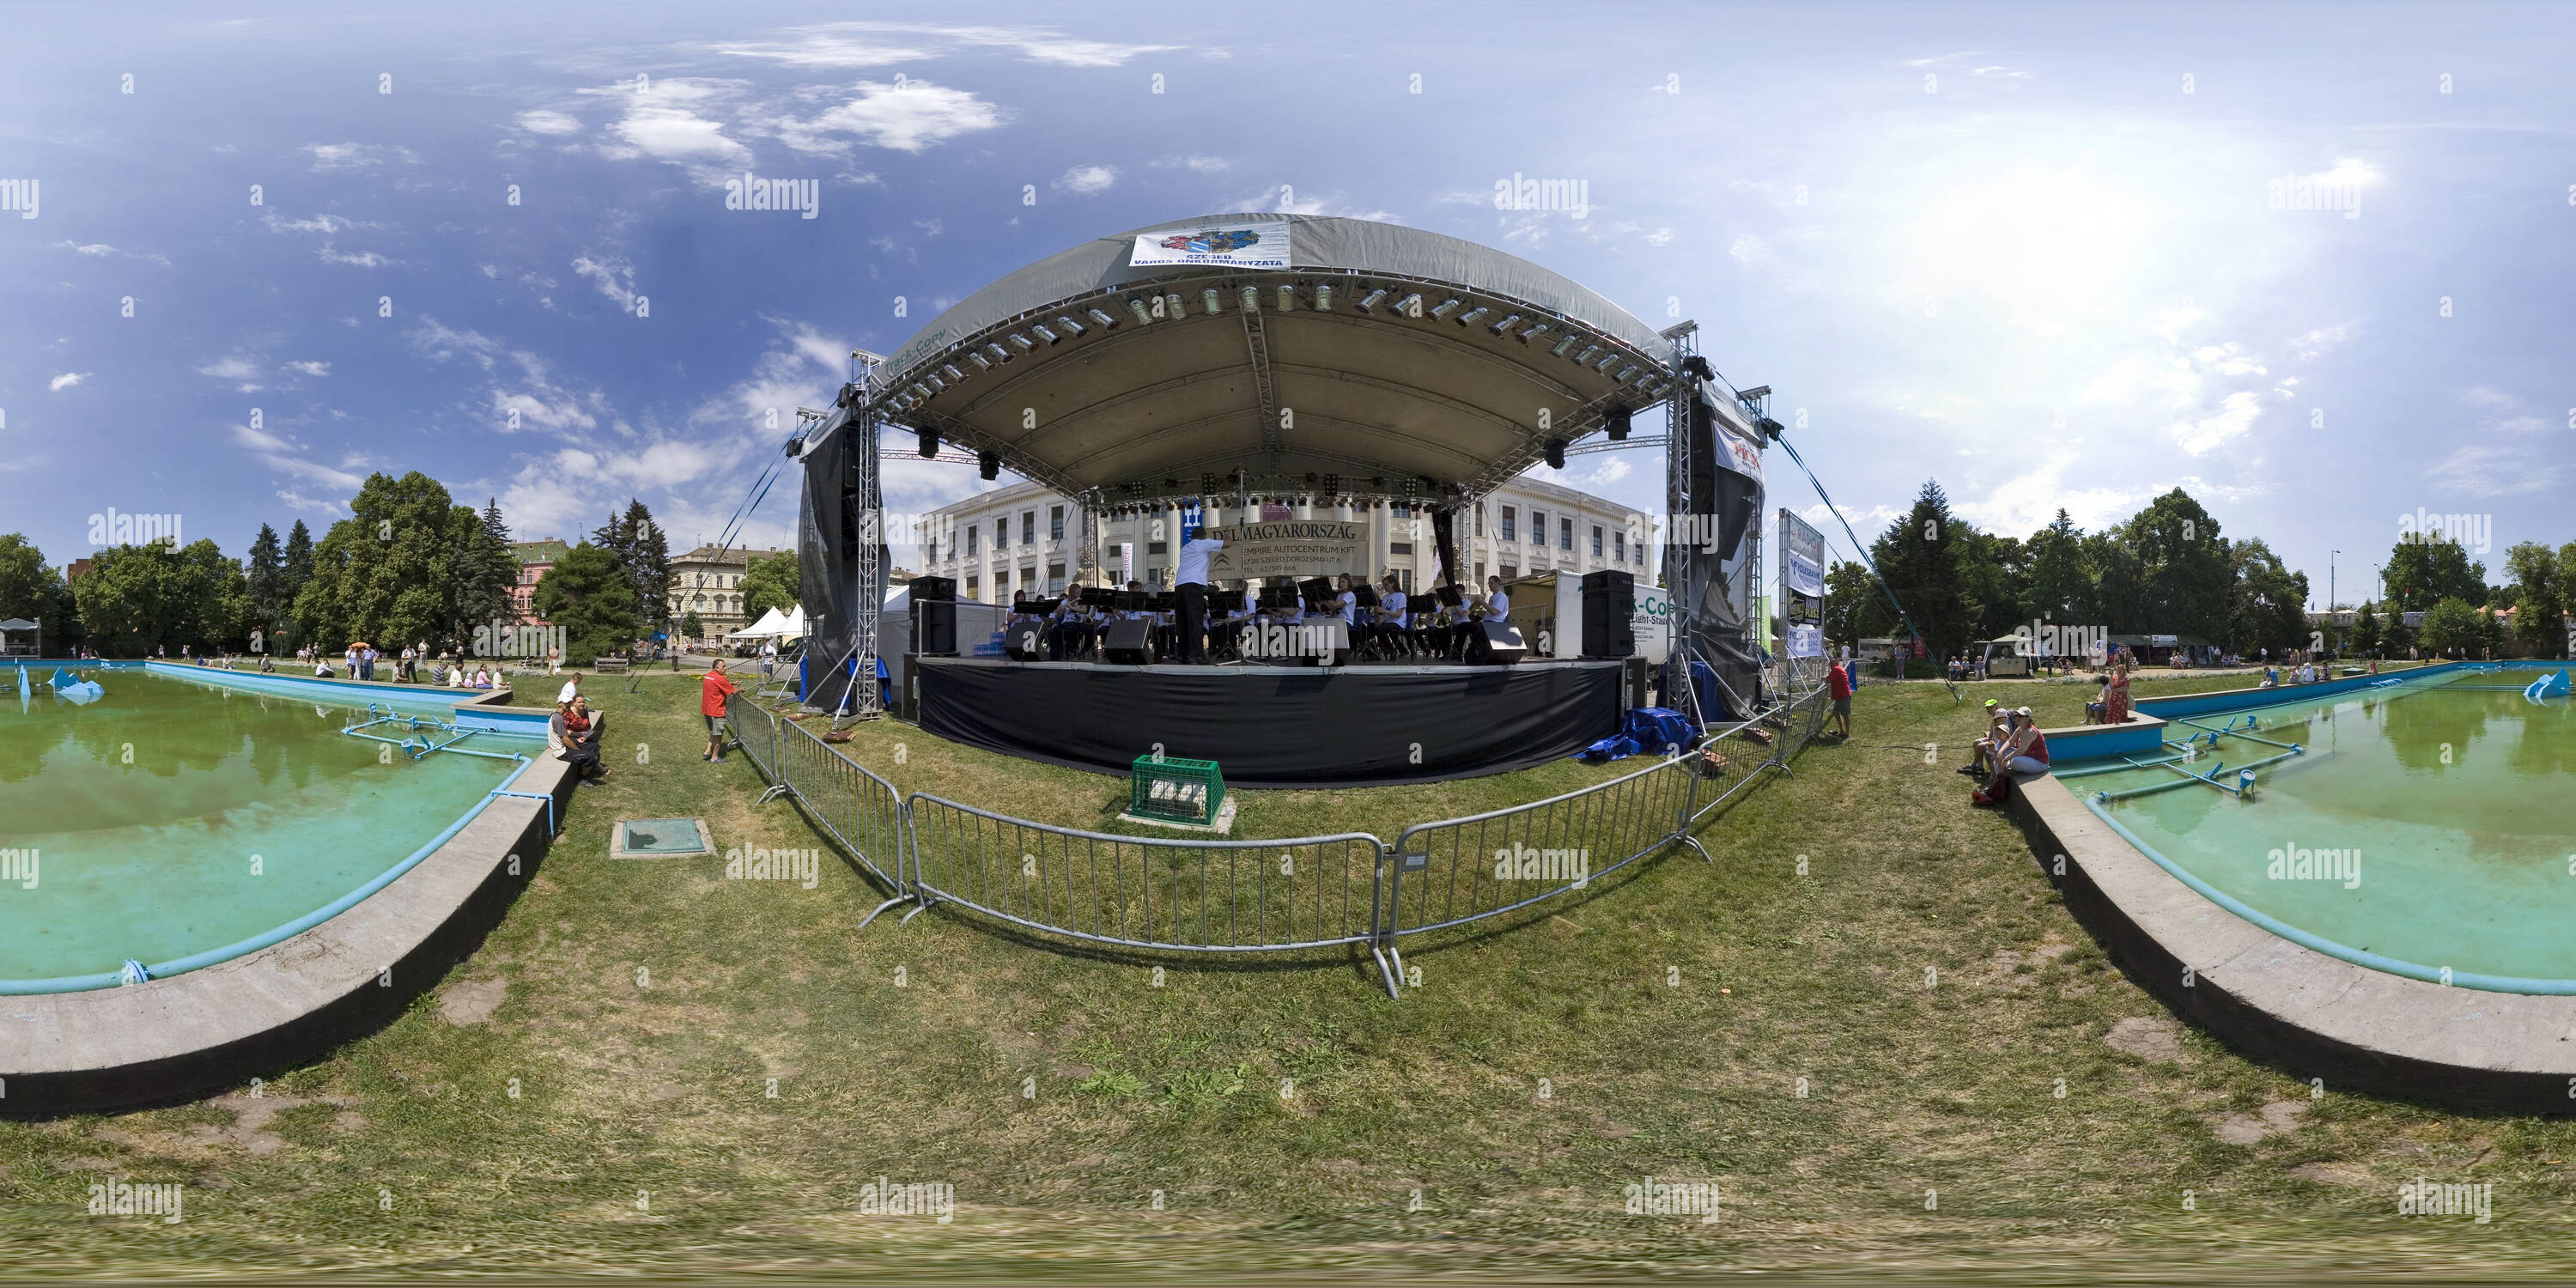 360 degree panoramic view of The day of Szeged  - Bridge fair - Makó brass band concert